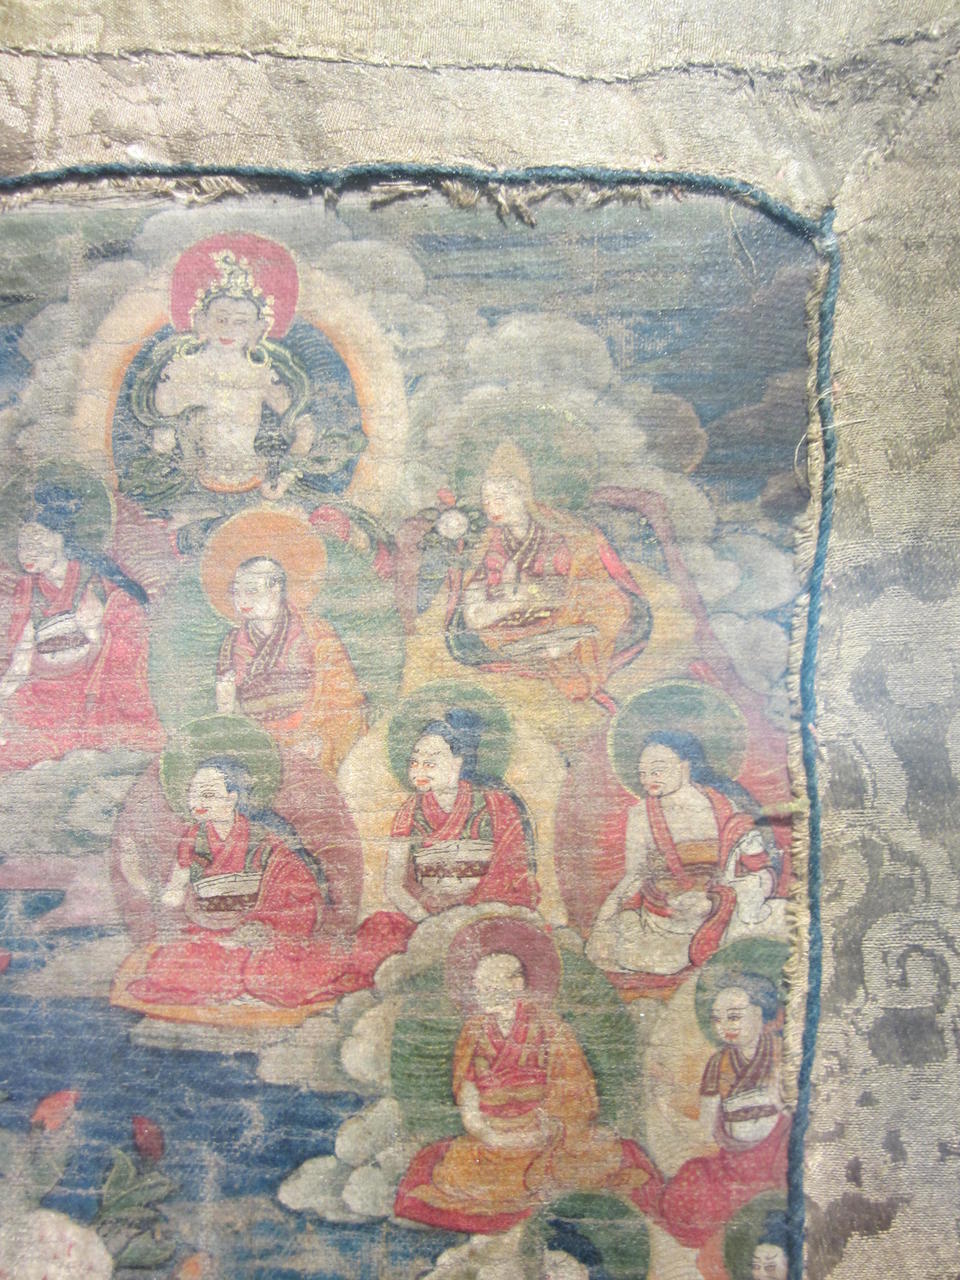 A THANGKA OF A NYINGMA REFUGE FIELD  Tibet, 19th century